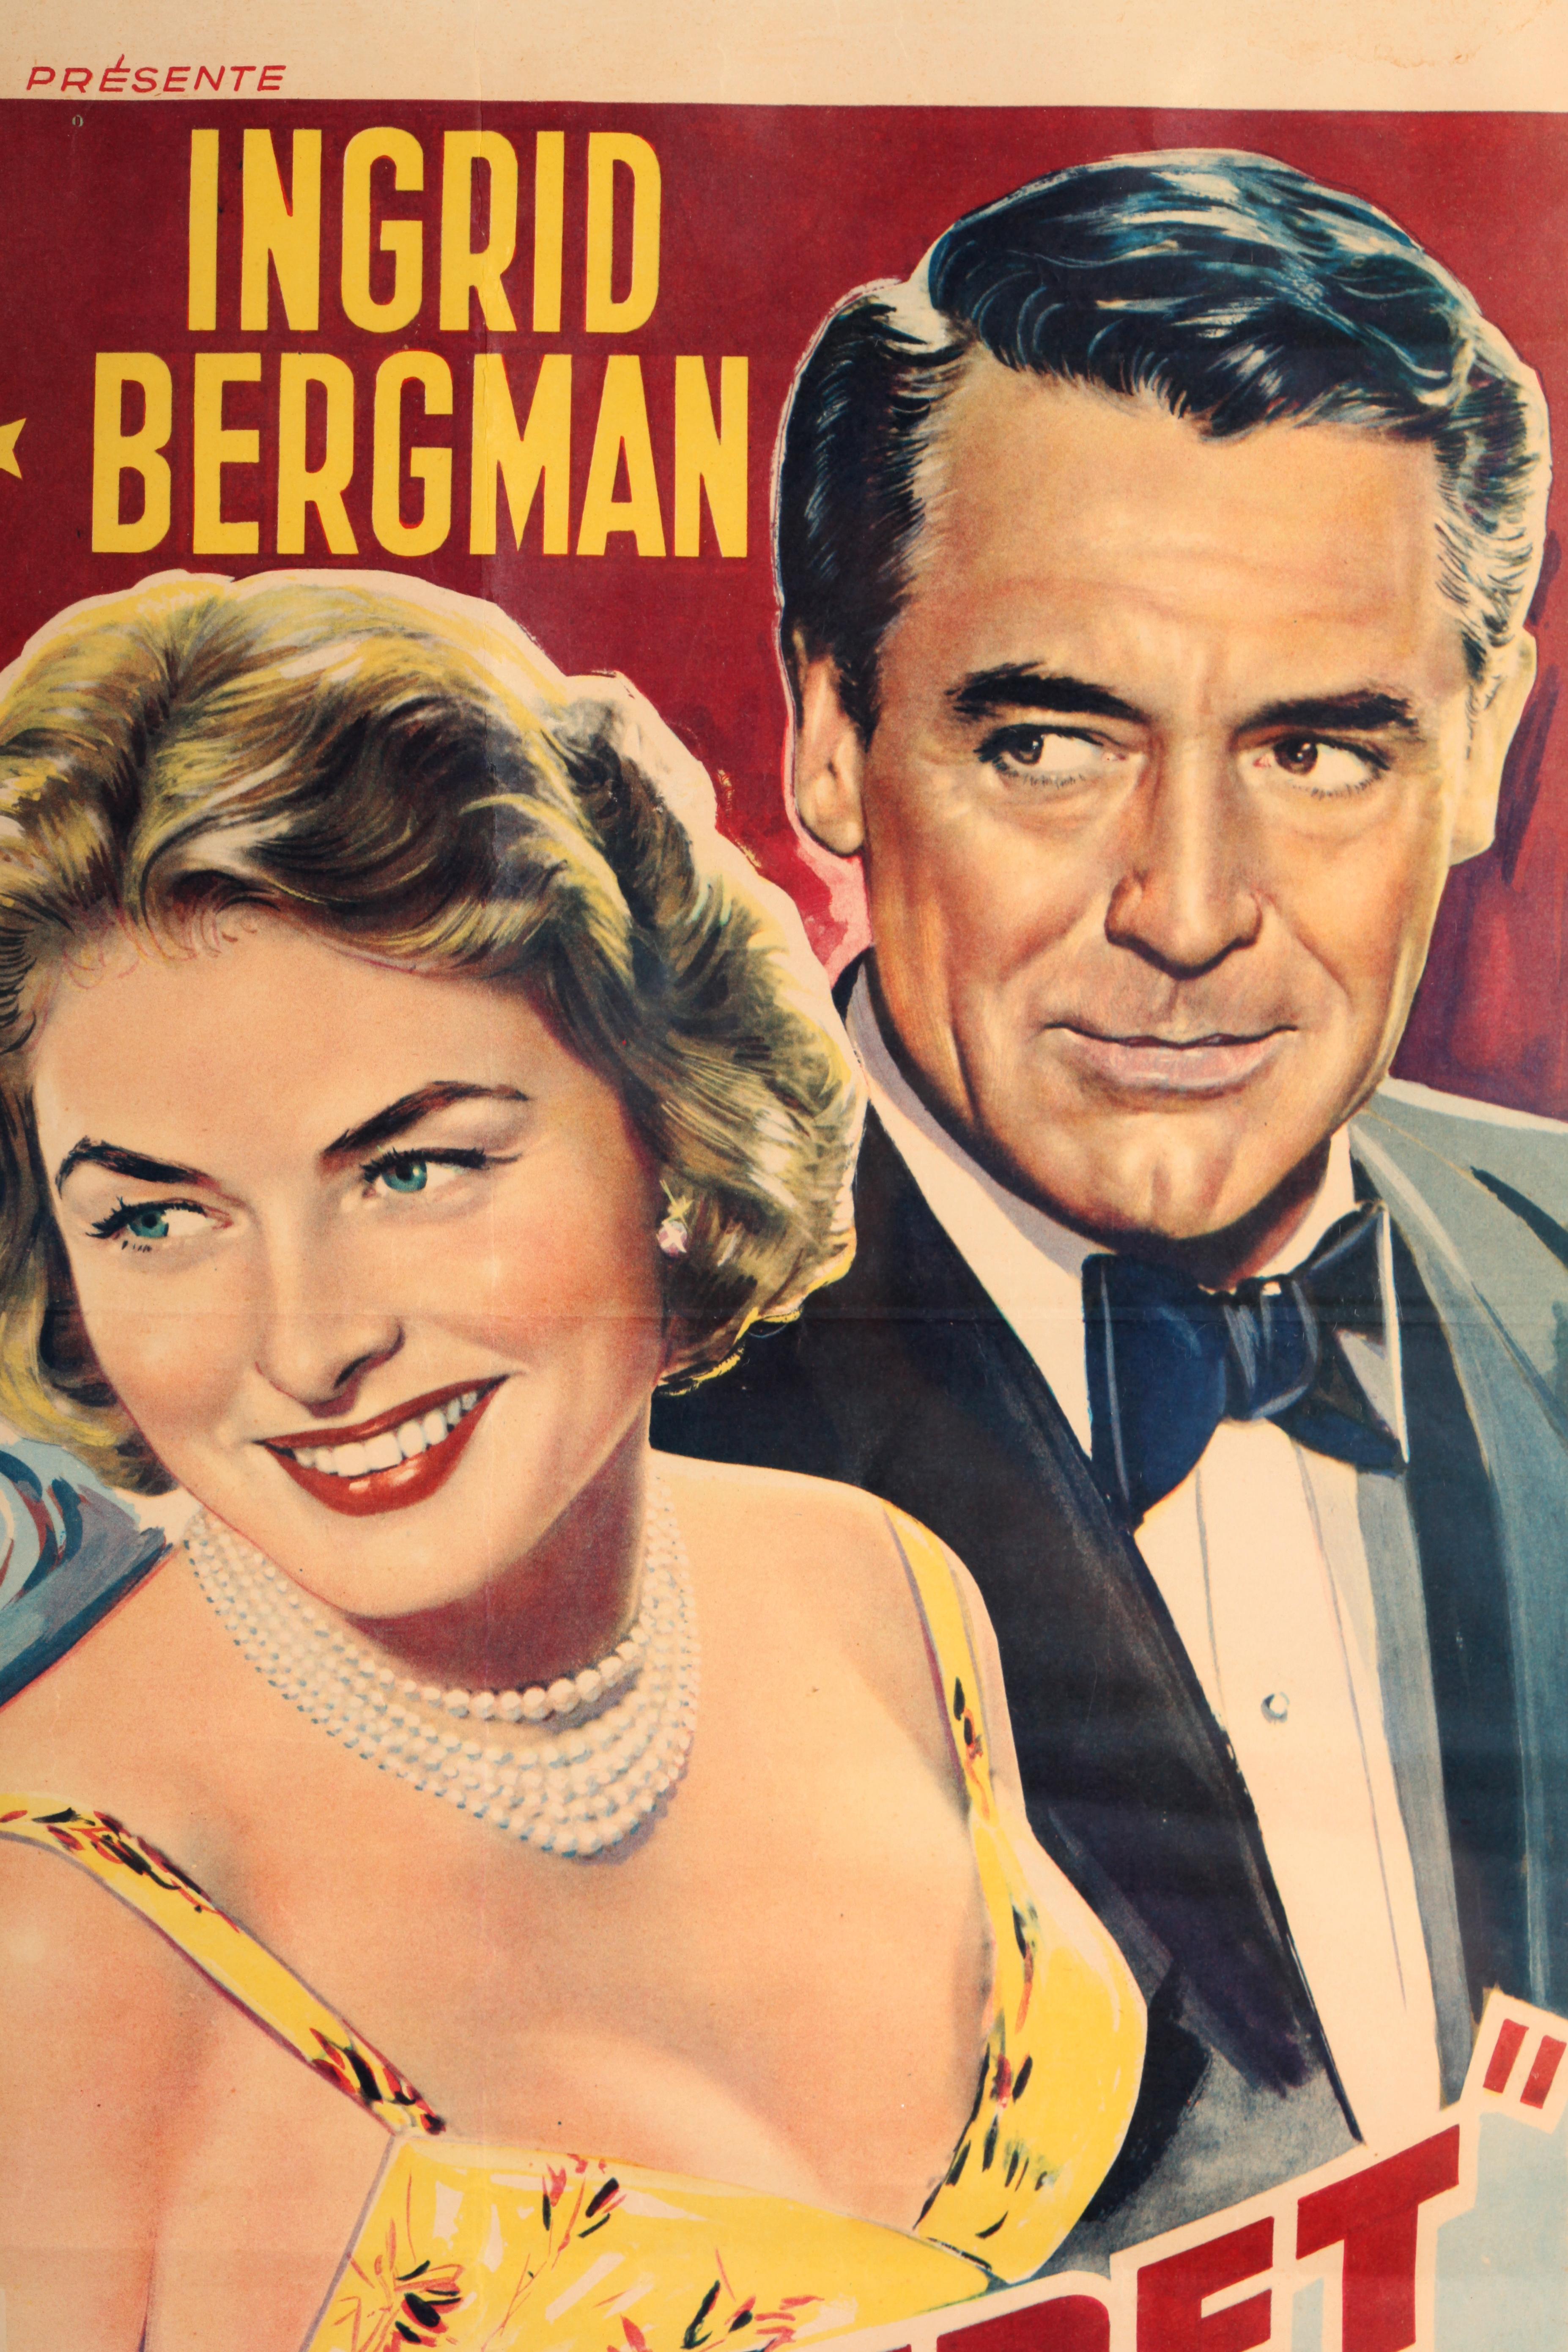 From Warner Brothers is this Original Belgium Movie Poster of Indiscret starring Cary Grant and Ingrid Bergman that was found in Paris over 35 years ago. Indiscreet is a 1958 Technicolor British romantic comedy film directed by Stanley Donen and